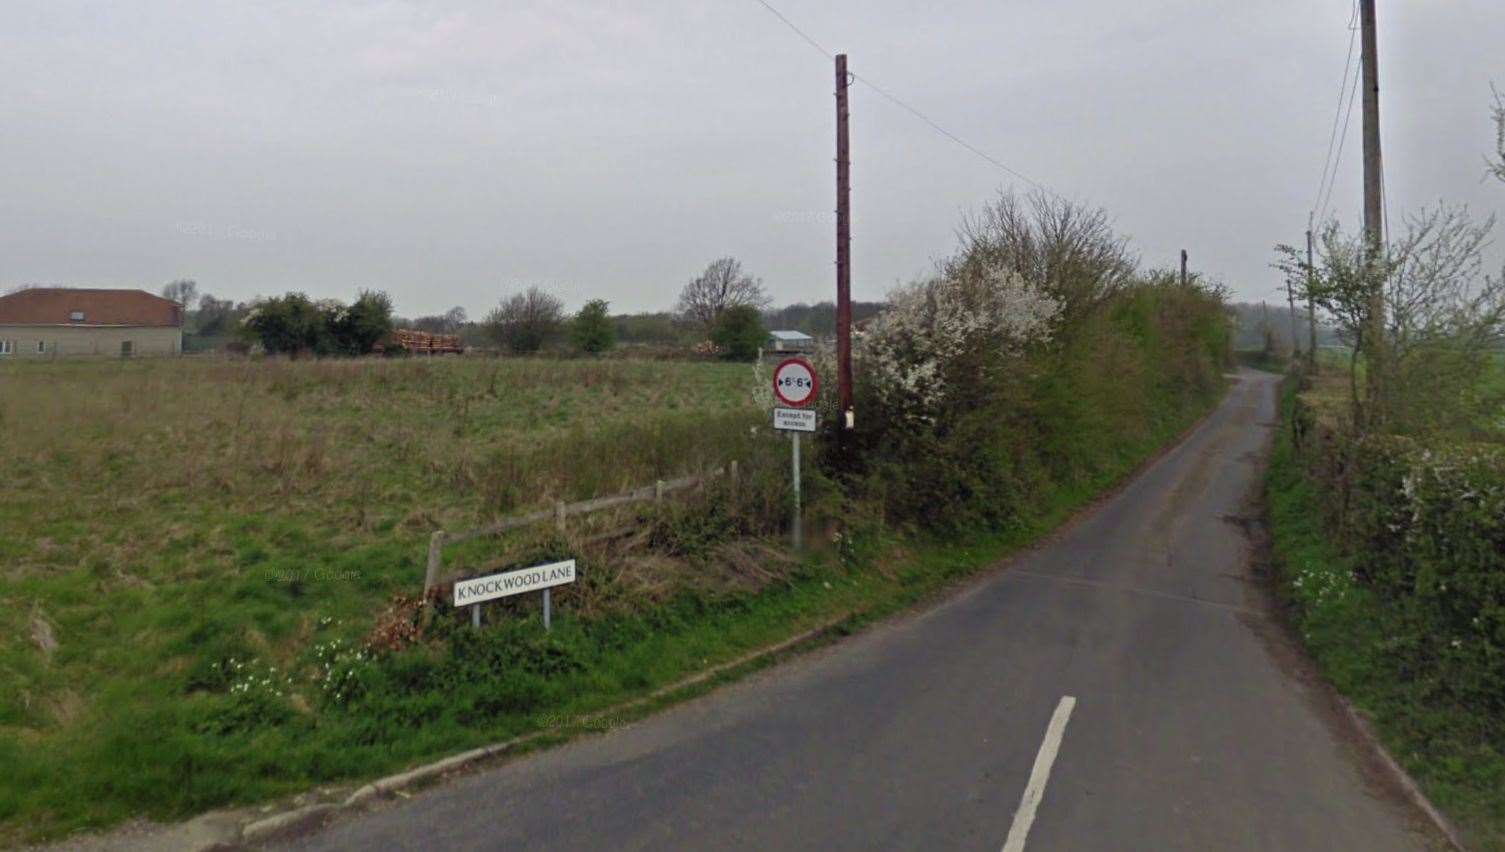 The fire occurred at a barn in Knockwood Lane, in Molash, Canterbury. Photo: Google maps